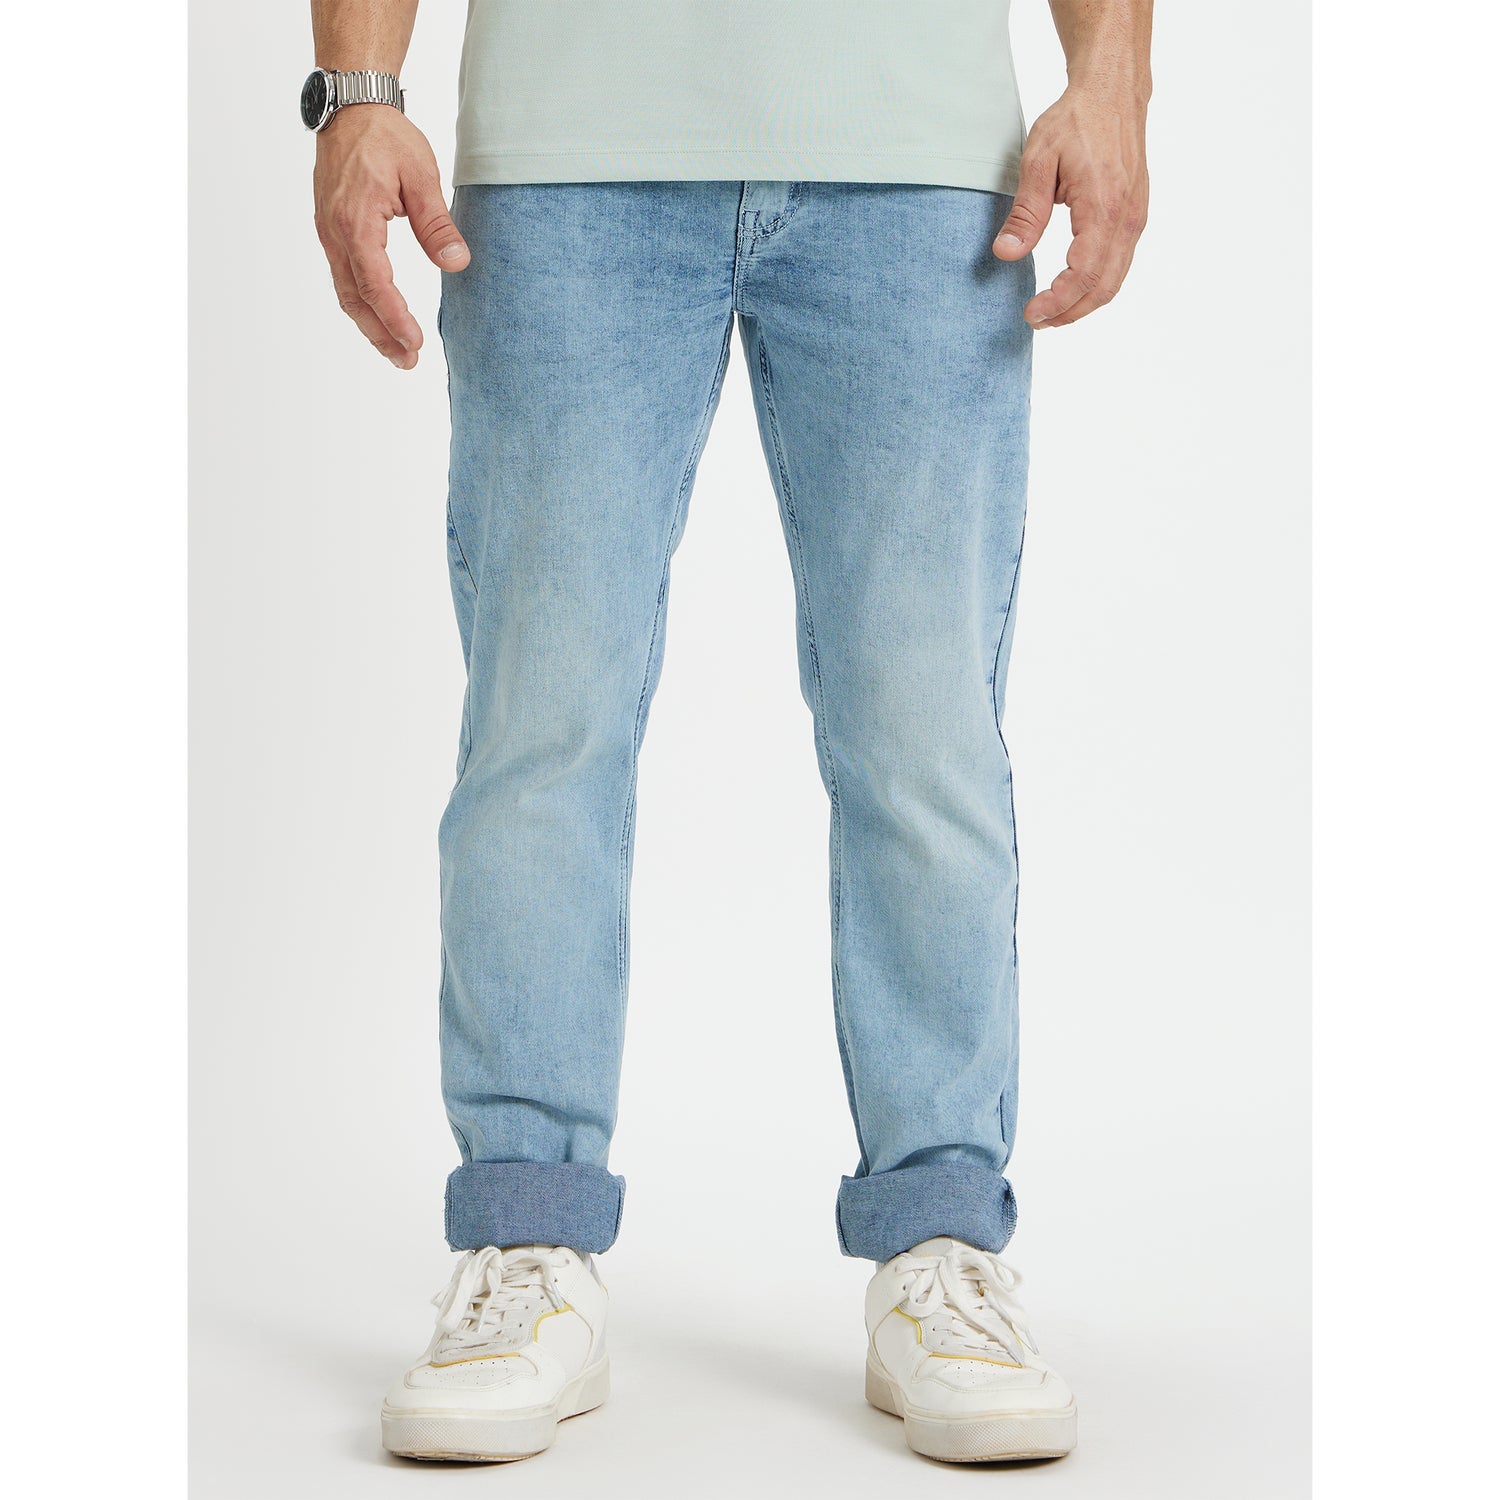 Blue Mid-Rise Jean Relaxed Fit Clean Look Heavy Fade Jeans (VOENTRY2ISTL)